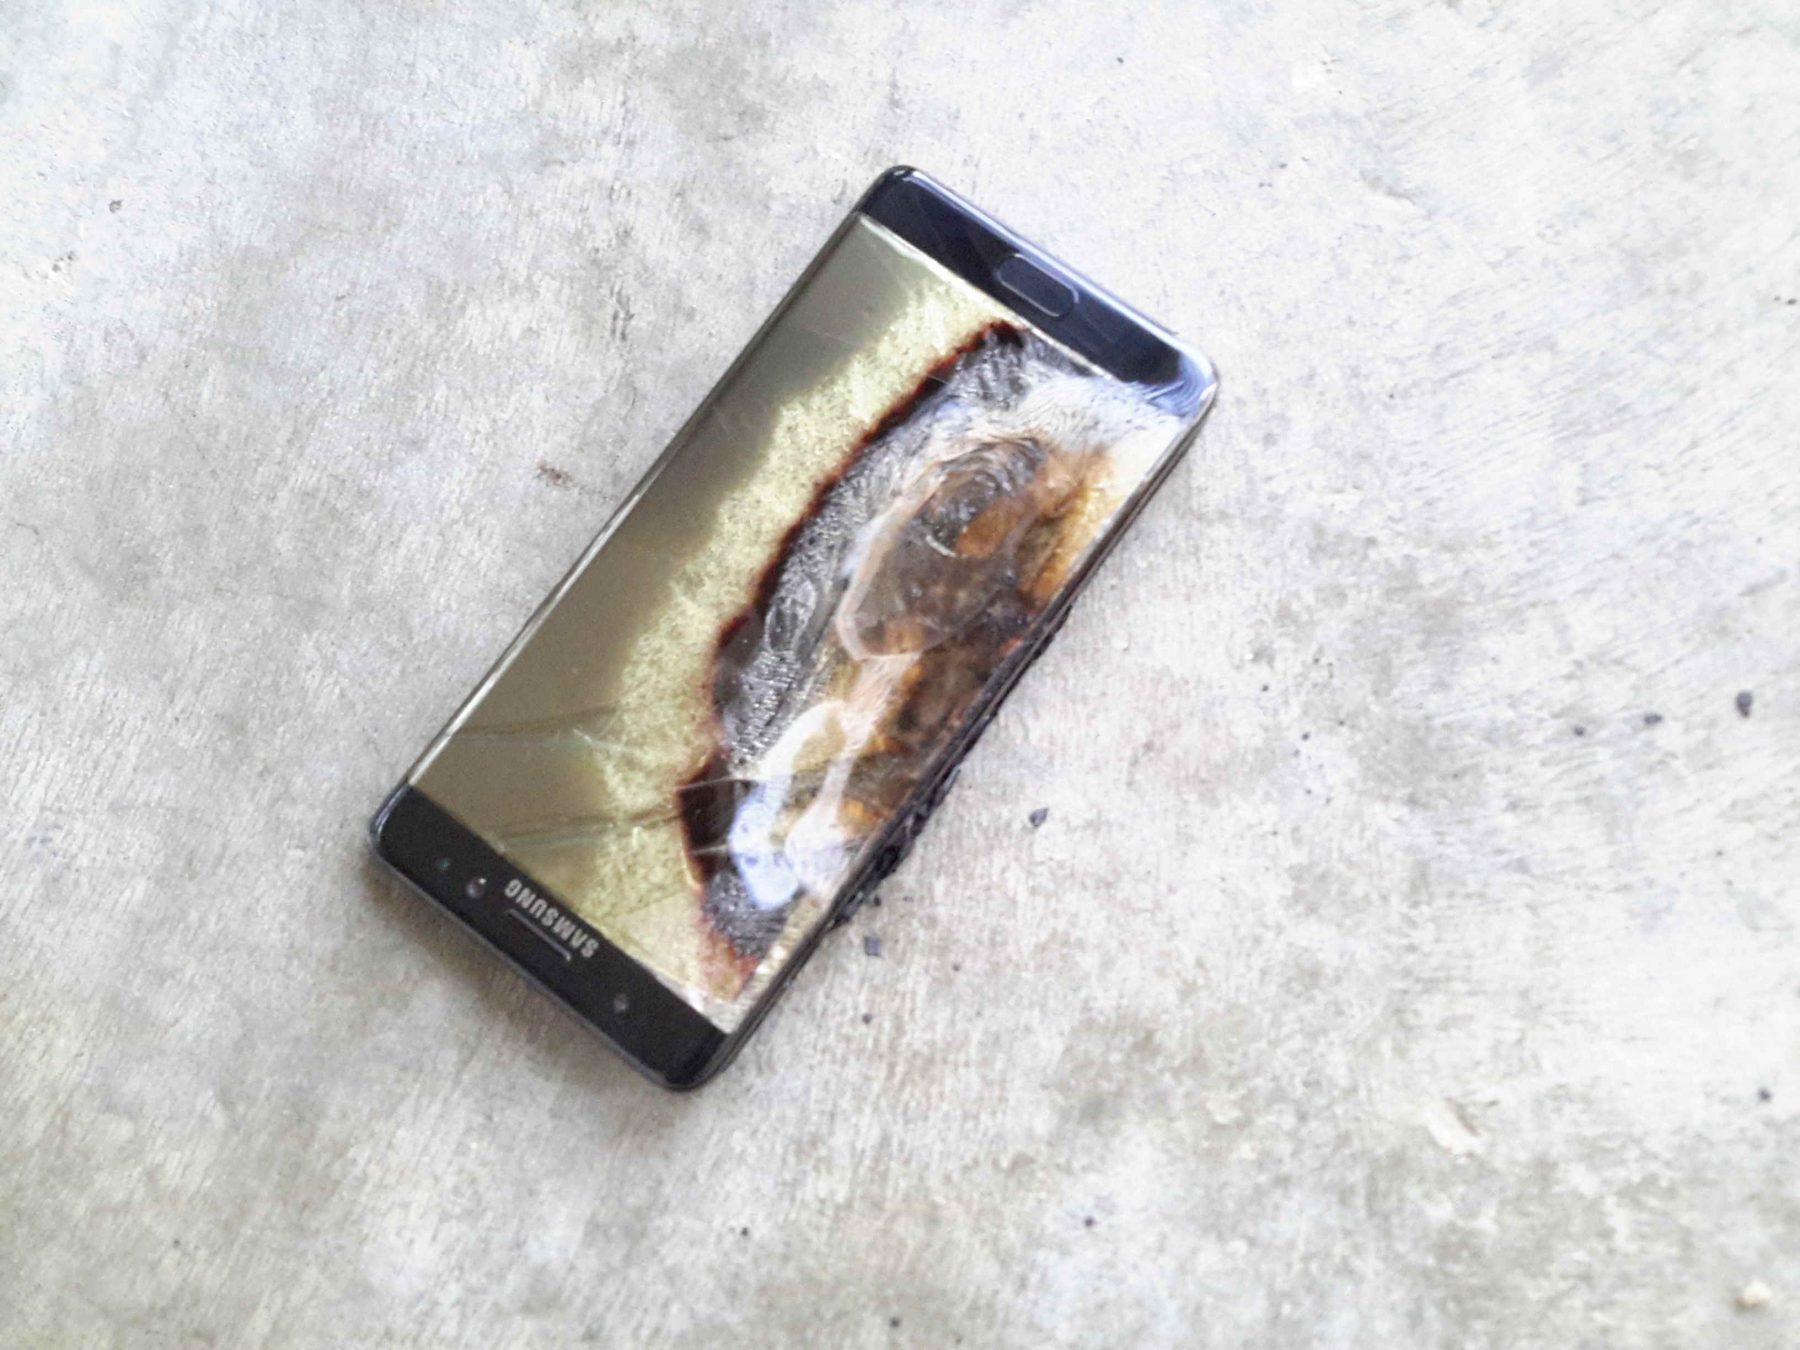 Samsung Galaxy Note 7 Explosion Causes $1,400 Damage In Australia (1)